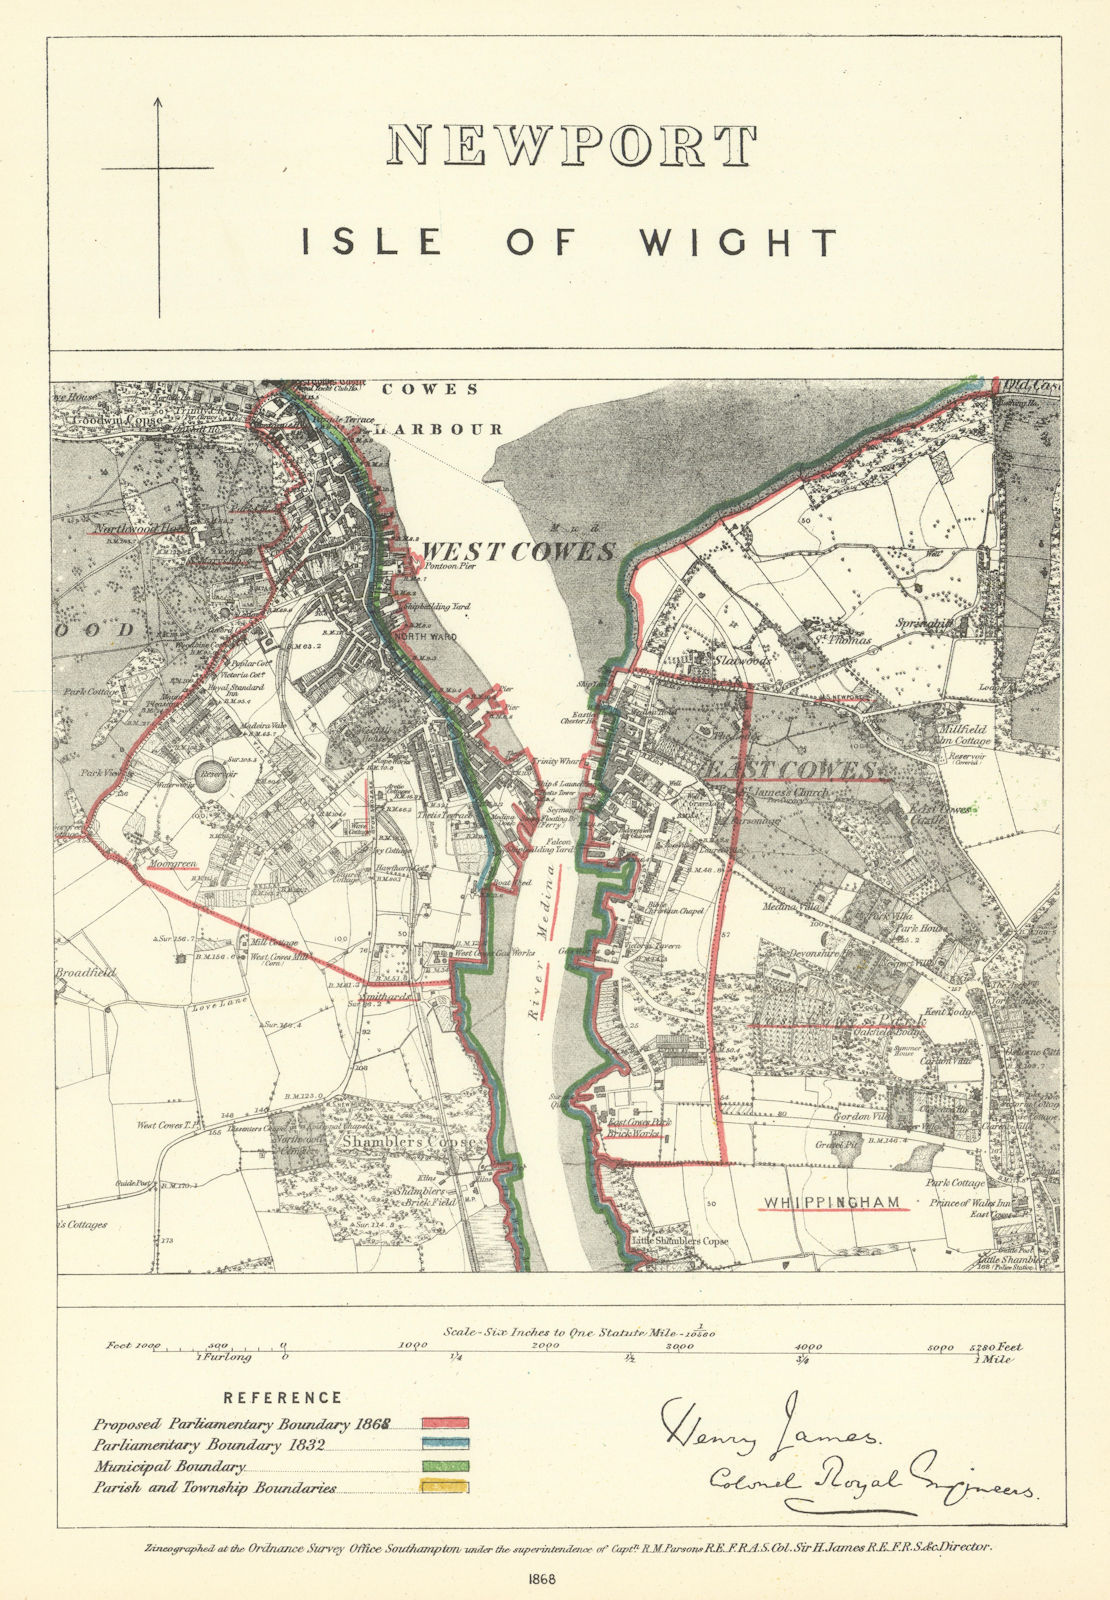 Cowes/Newport, Isle of Wight. JAMES. Parliamentary Boundary Commission 1868 map